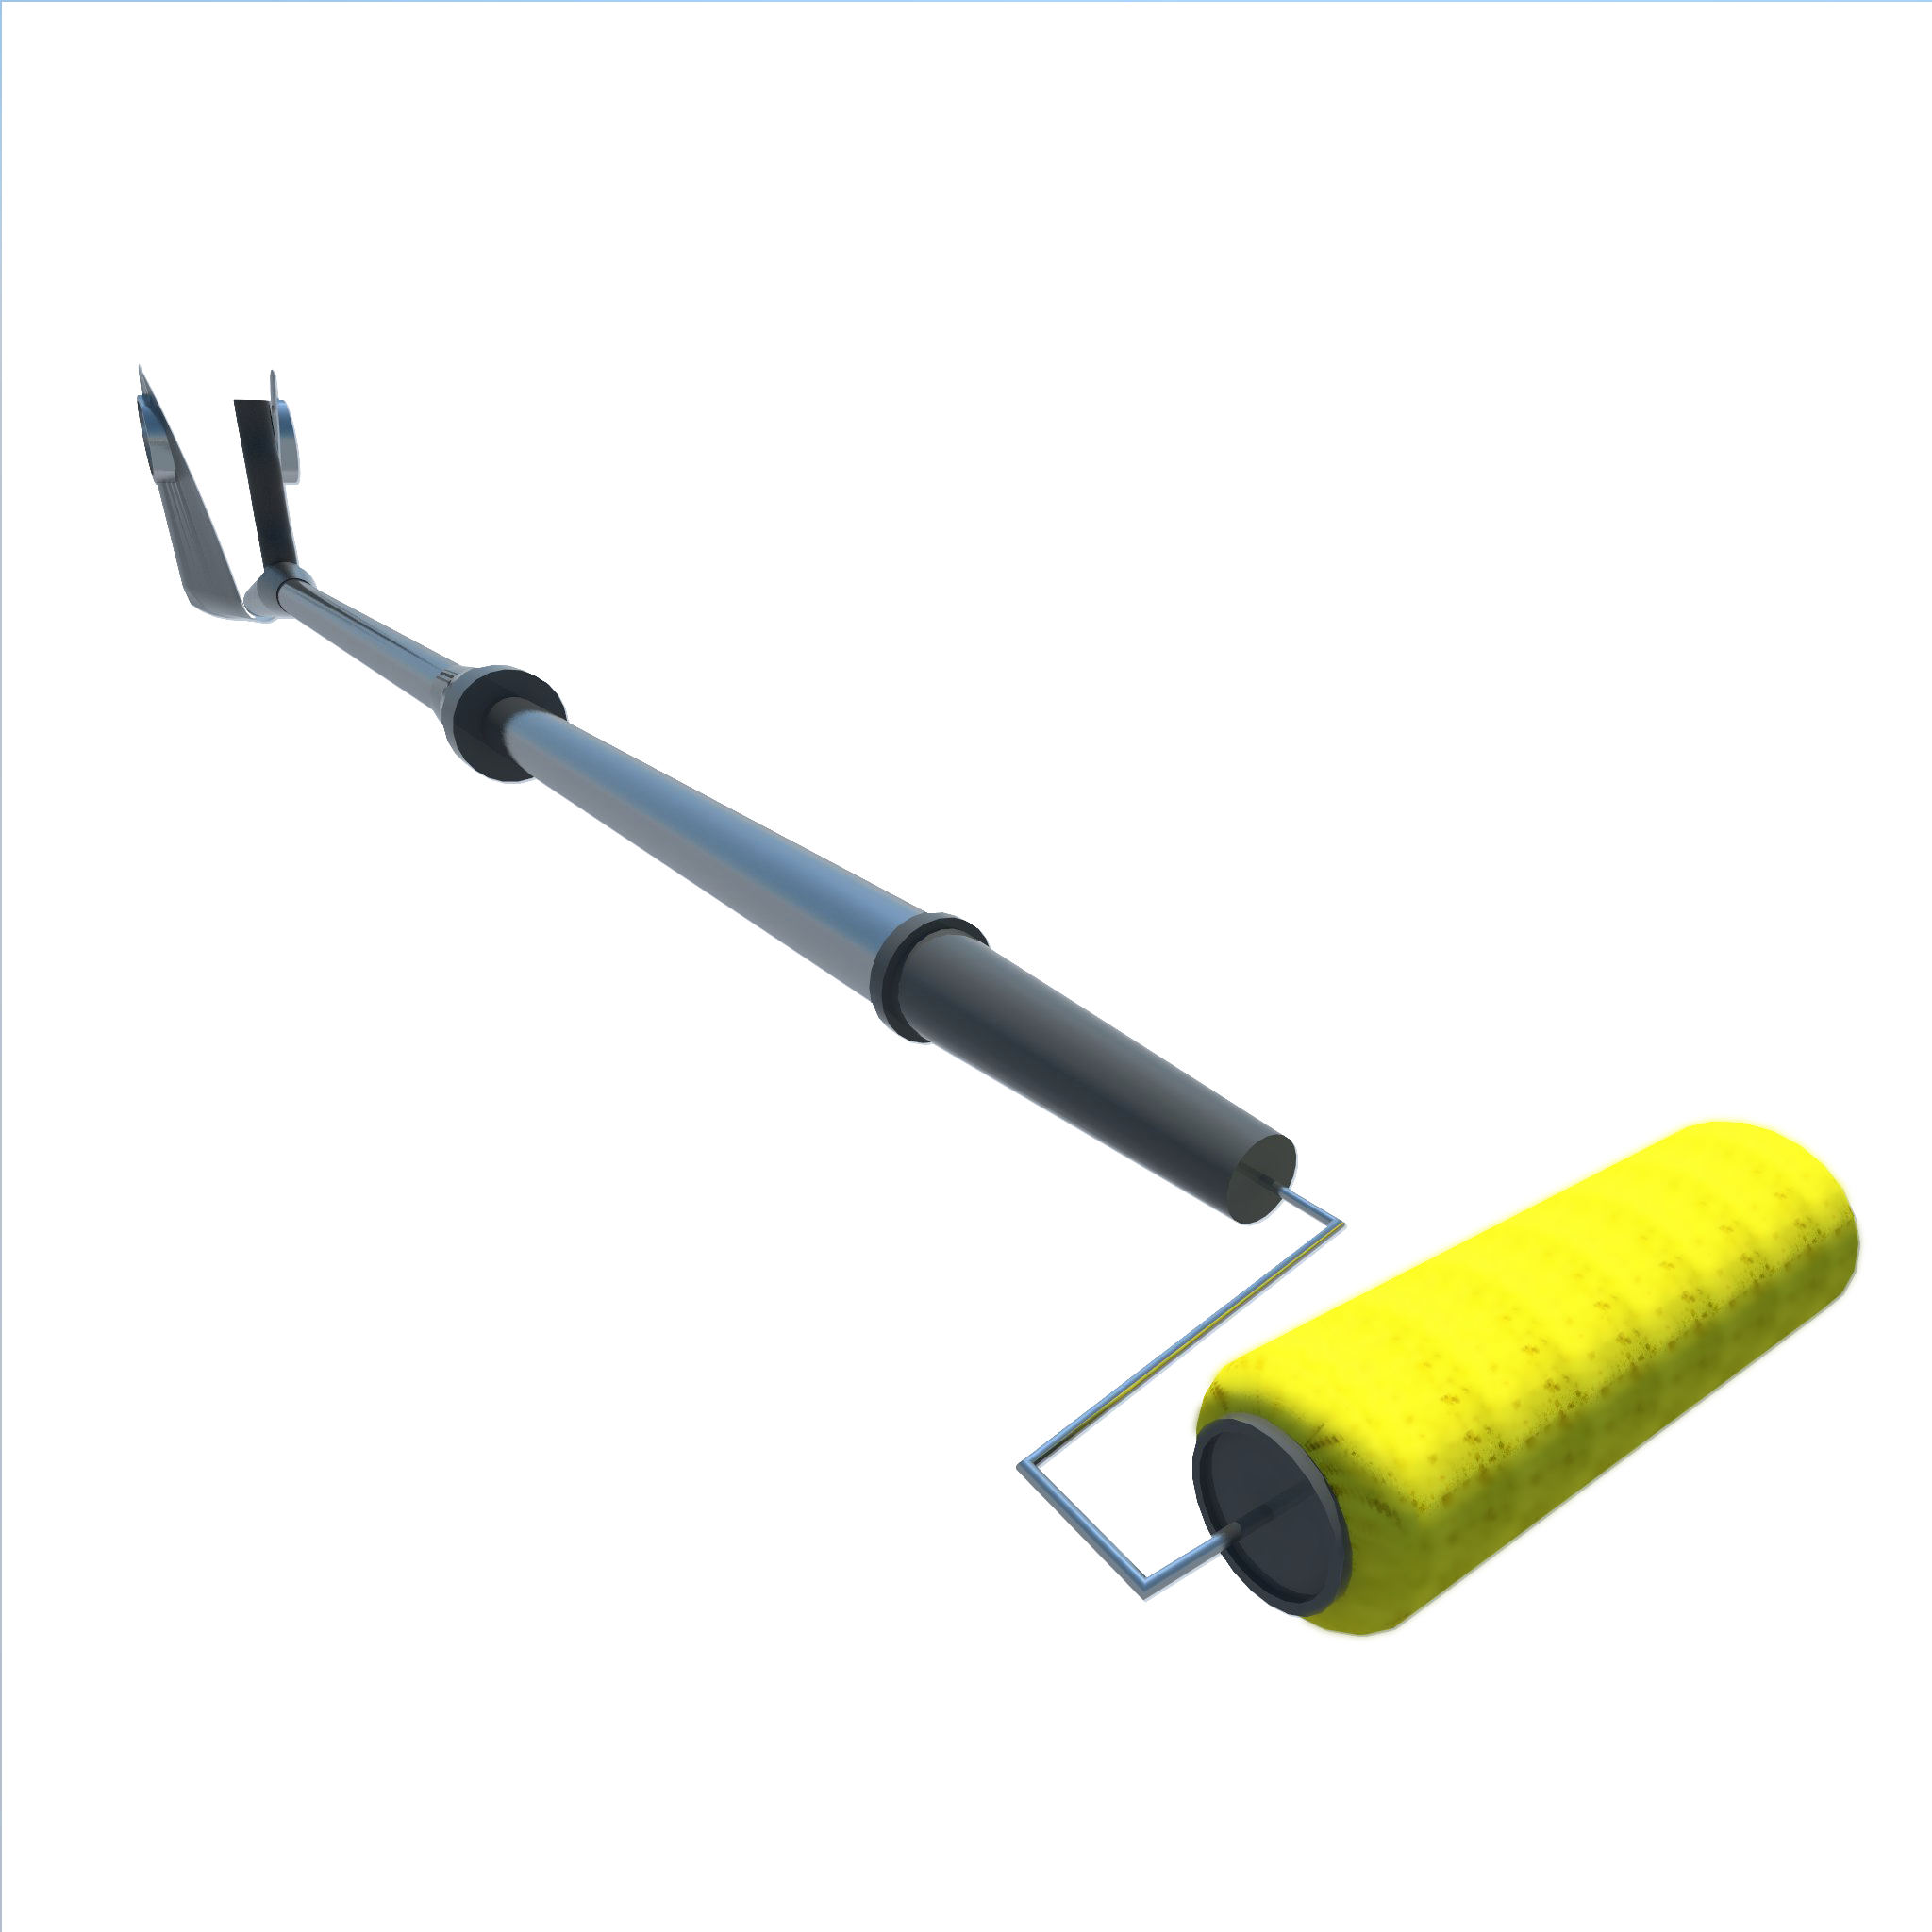 he One Arm Extension Handle is a household invention that provides an adjustable and extendable handle that can be connected to any type of tool such as brooms, mops, paint rollers, and other items